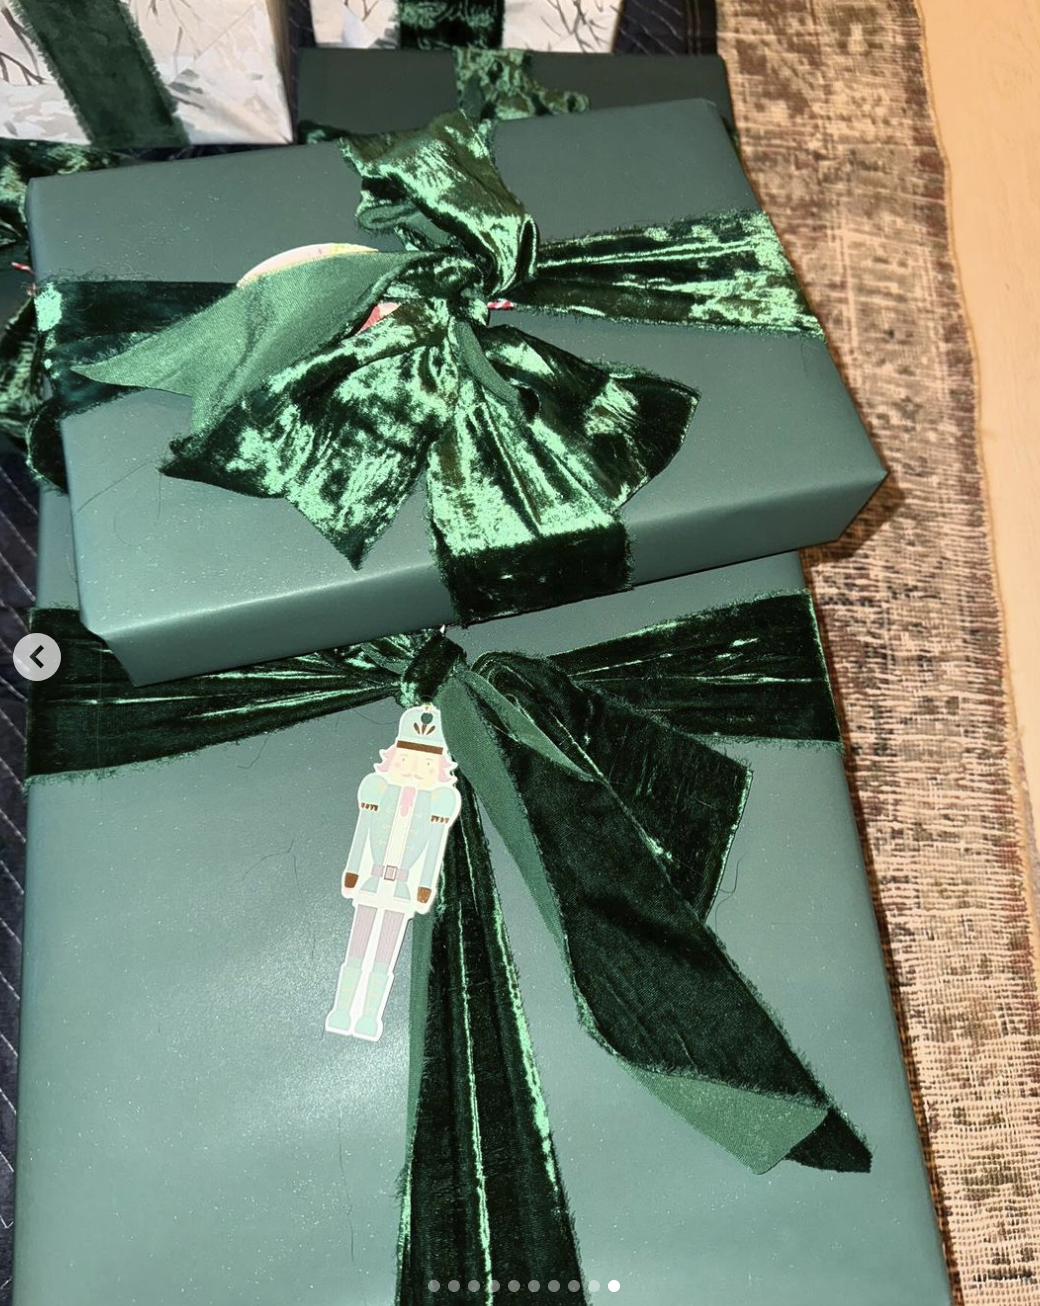 Presents with green paper and ribbons